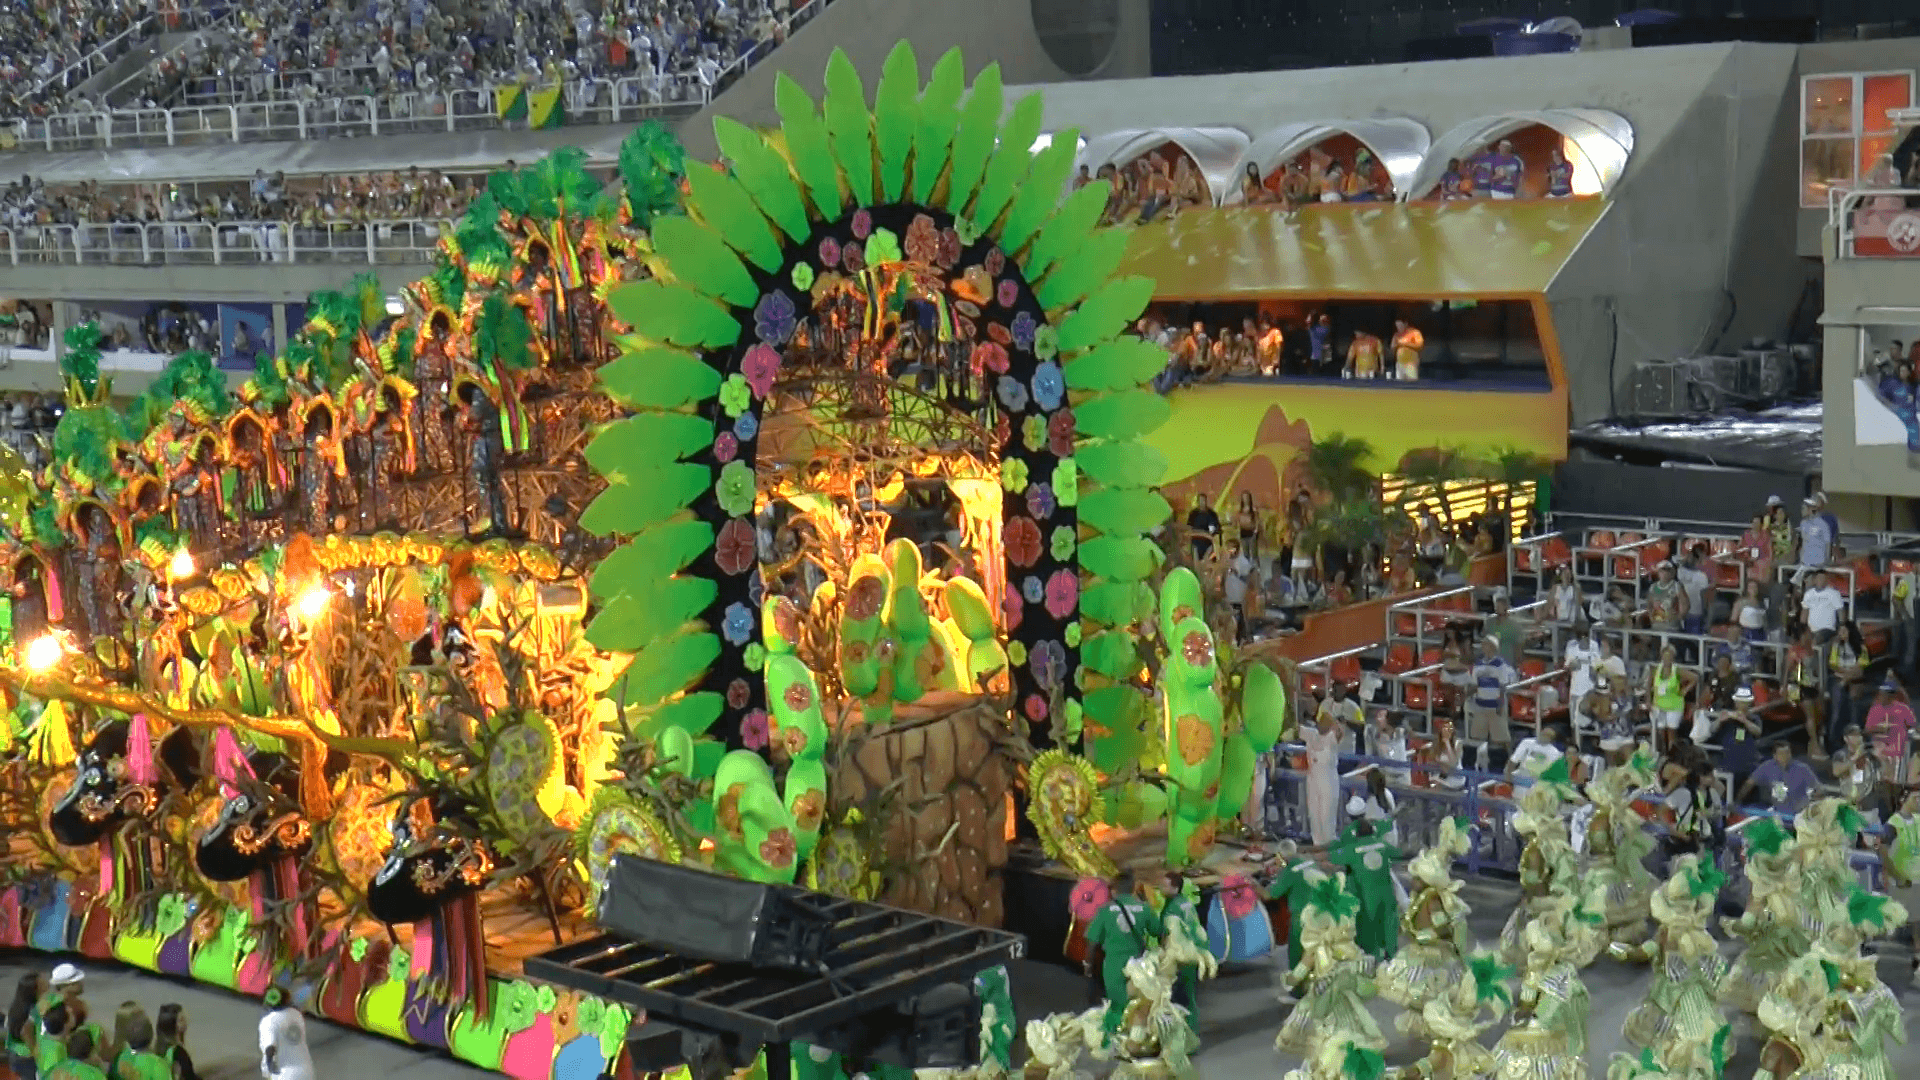 CARNIVAL RIO DE JANEIRO 4_ decorated stage at the Carnival